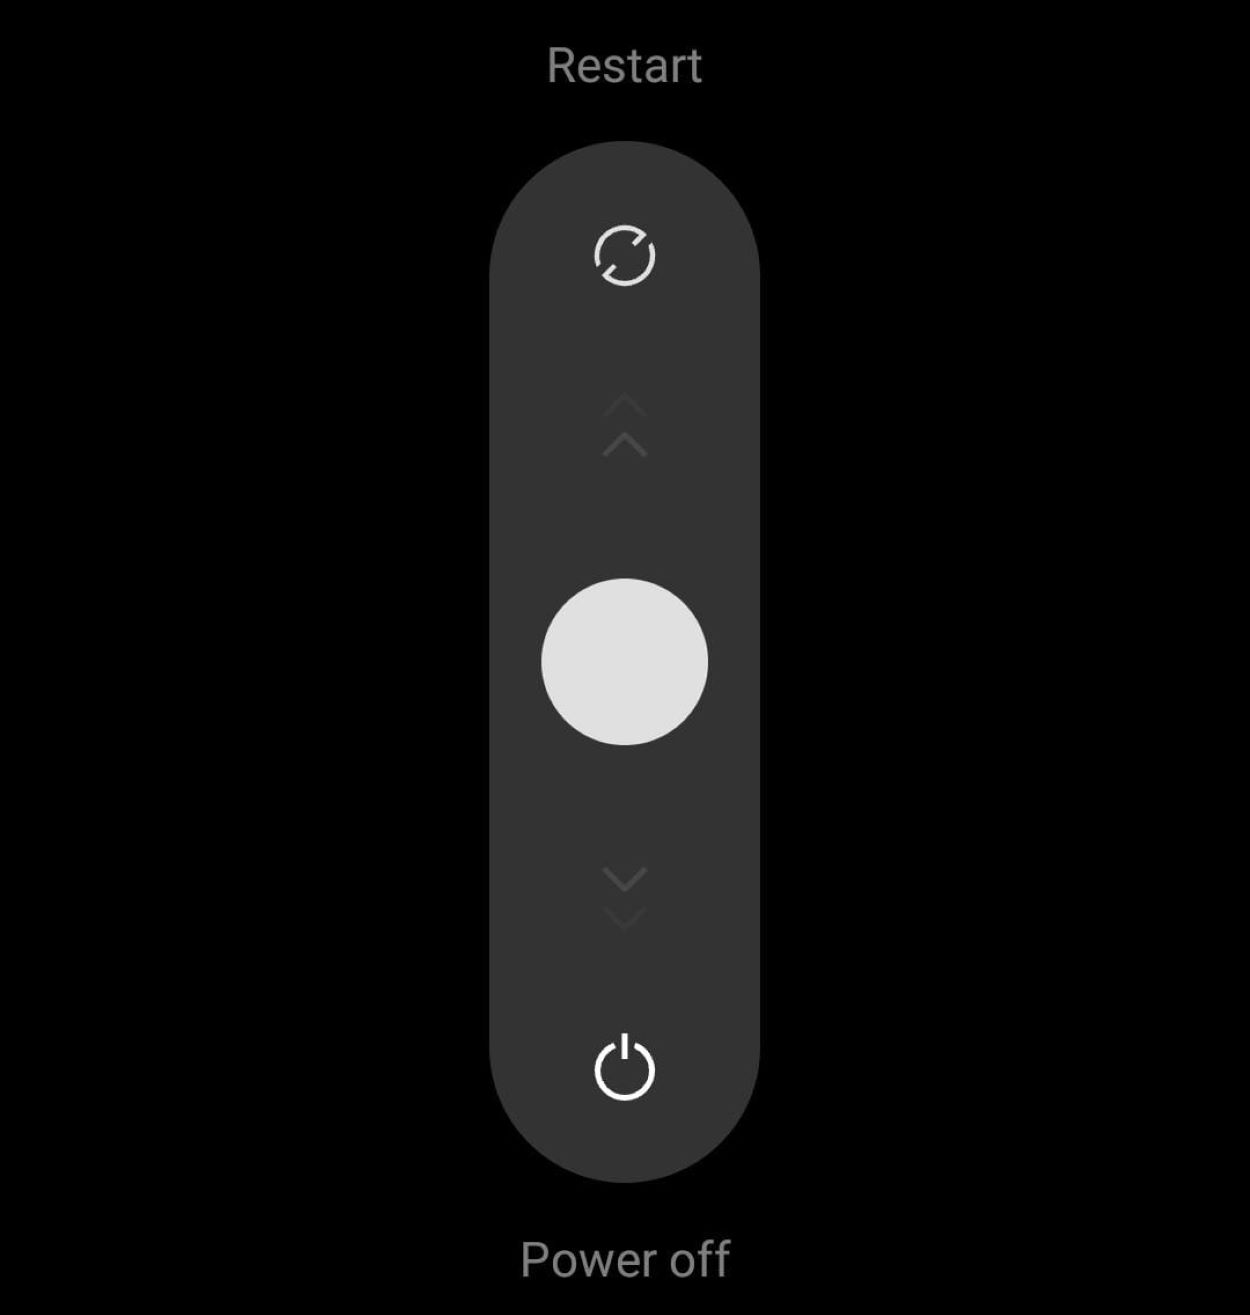 A slider to restart or power off your device.